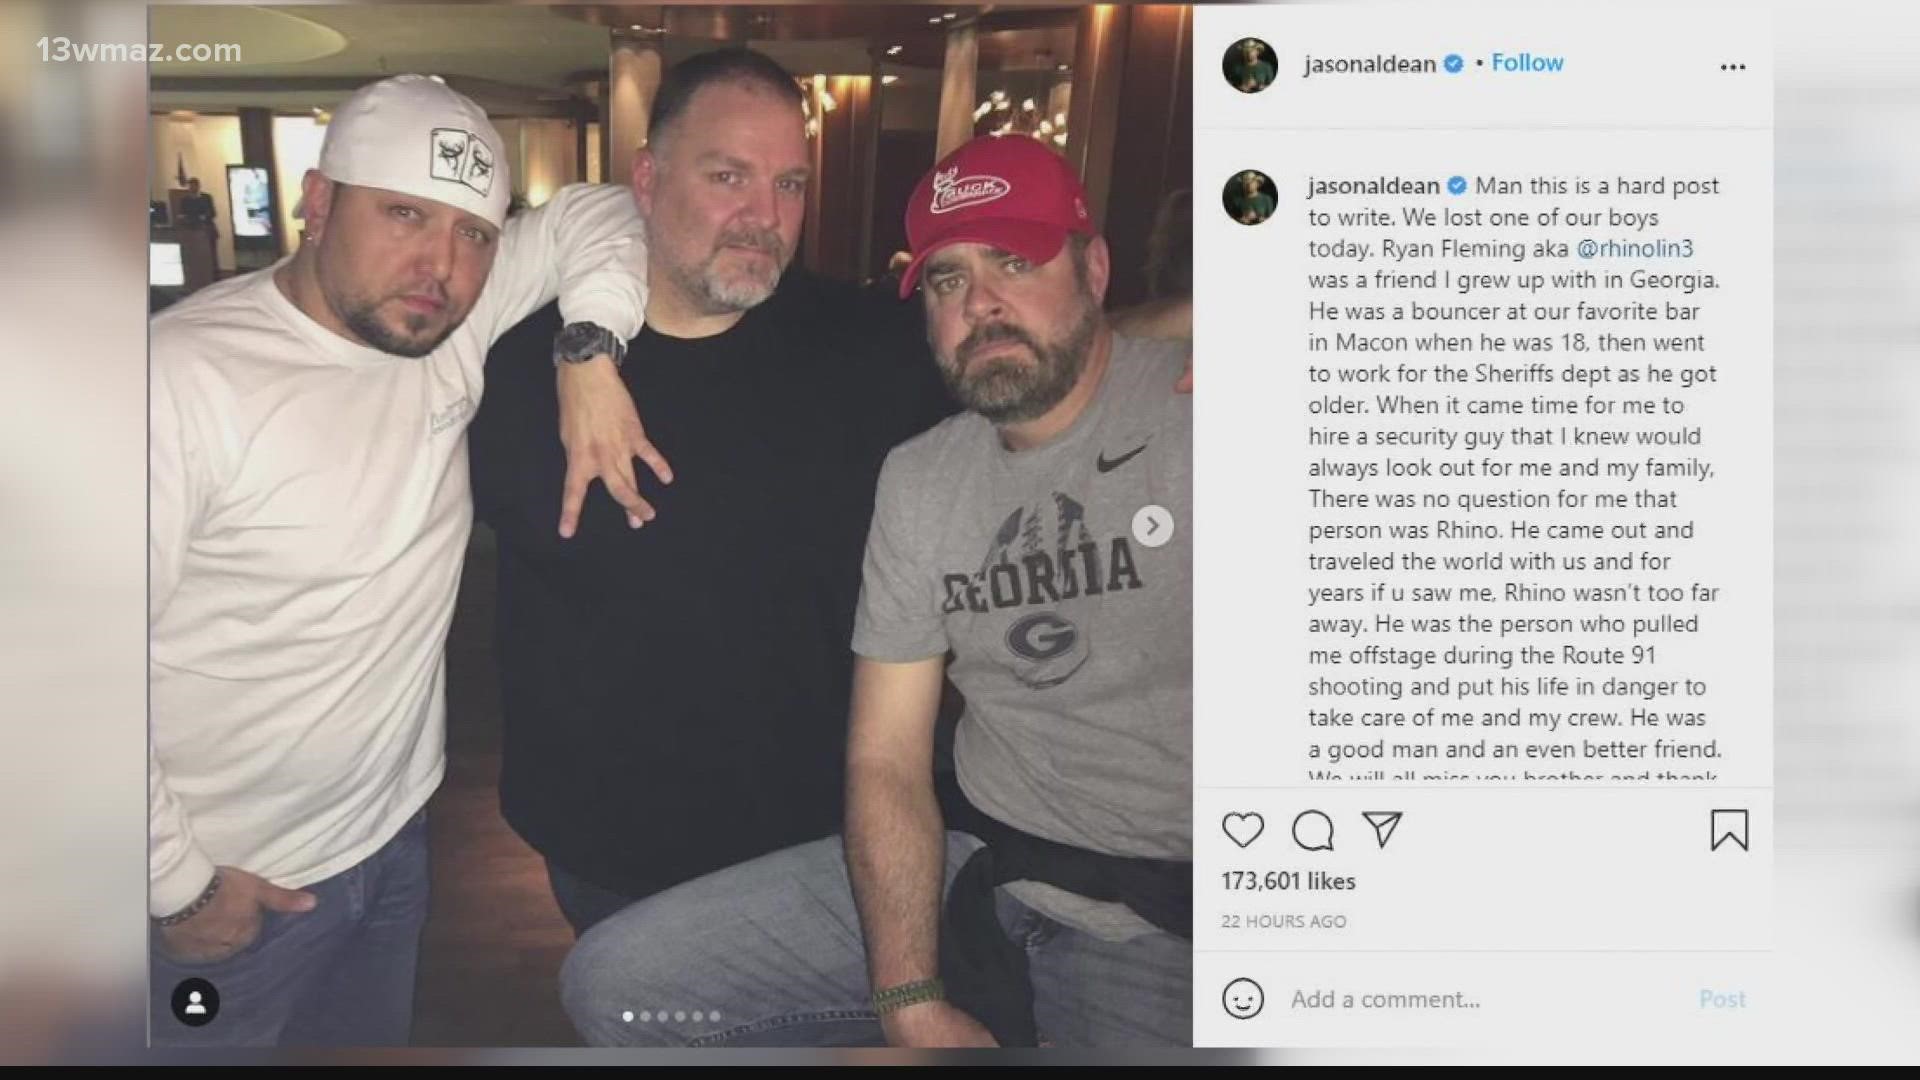 According to Aldean's Instagram account, 44-year-old Ryan Fleming passed away Wednesday. The post says Fleming and Aldean grew up together in Macon